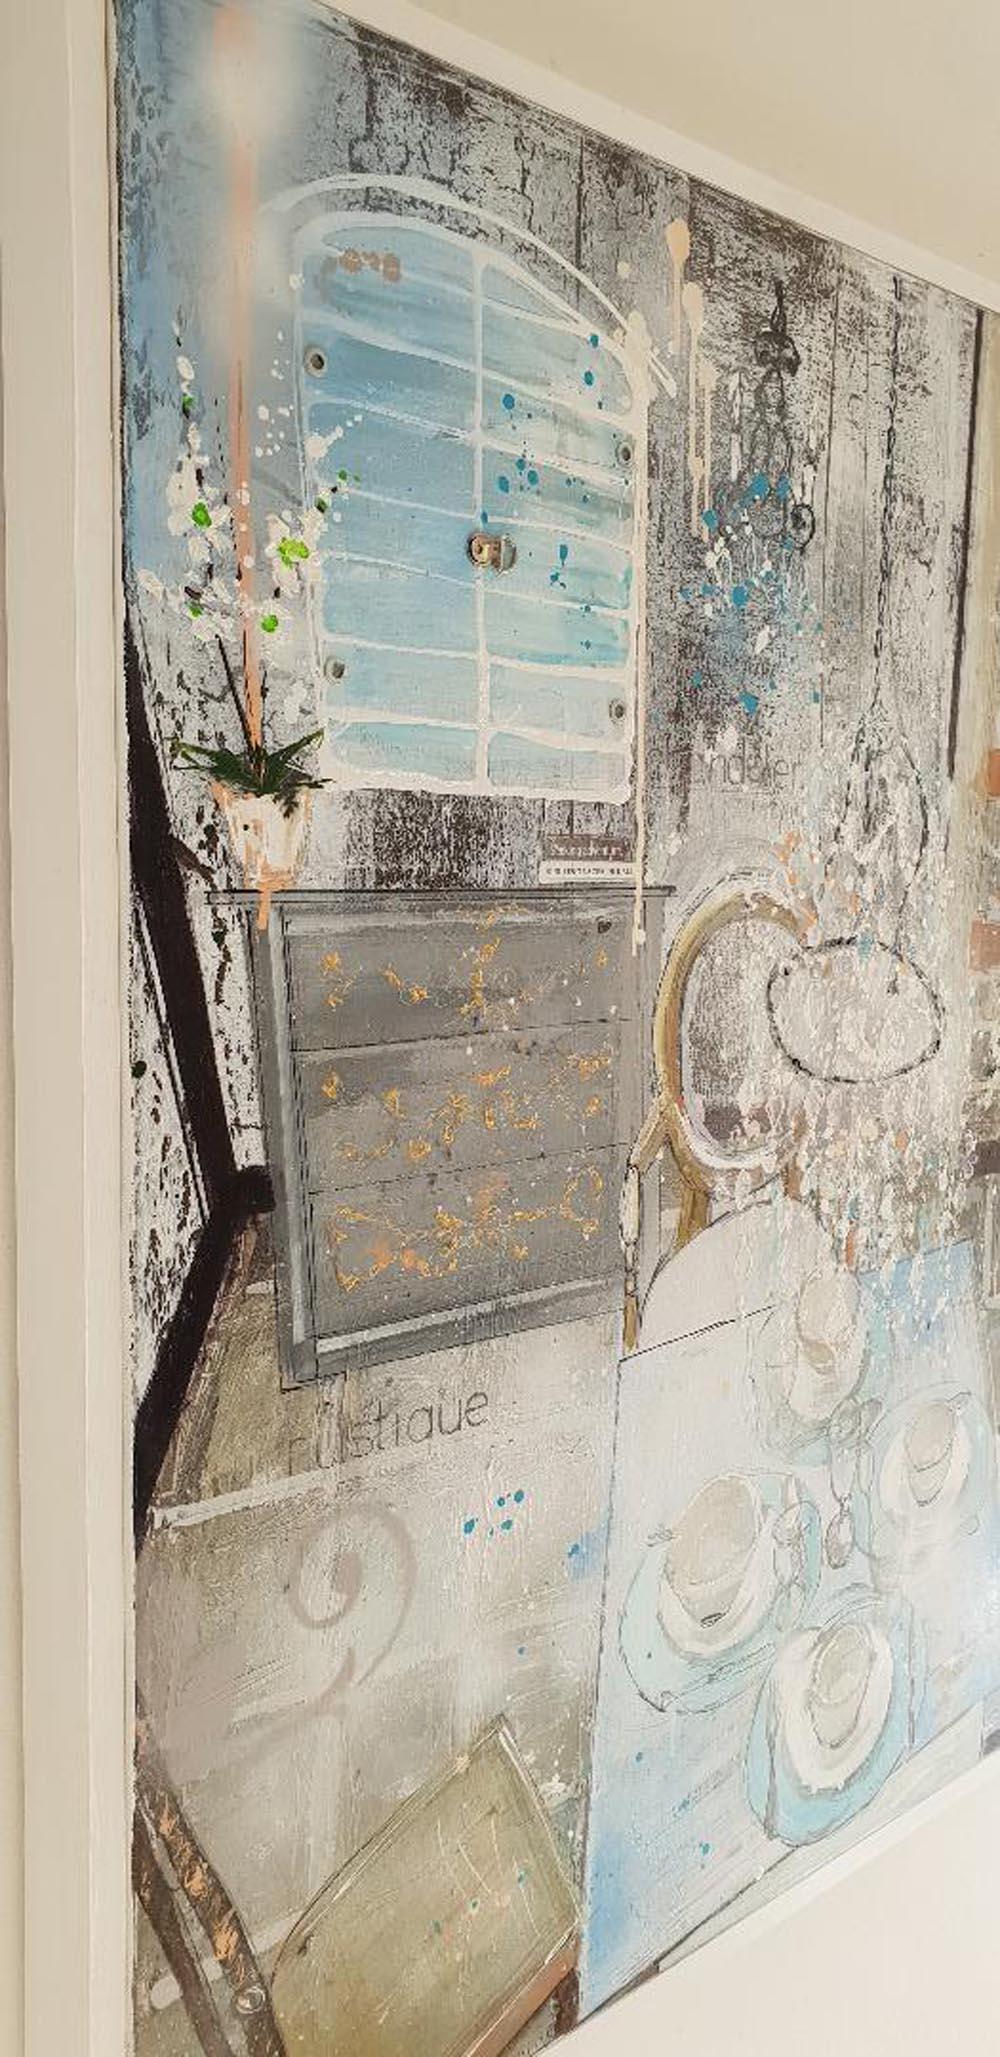 A Touch of France by Julia Adams is a blue and silver mixed media interior space painting.
Medium - mixed media and acrylic
Size - 80x80cms deep edge canvas framed in a white frame 1.5cms depth
Painting from Julia's contemporary series 'Interior